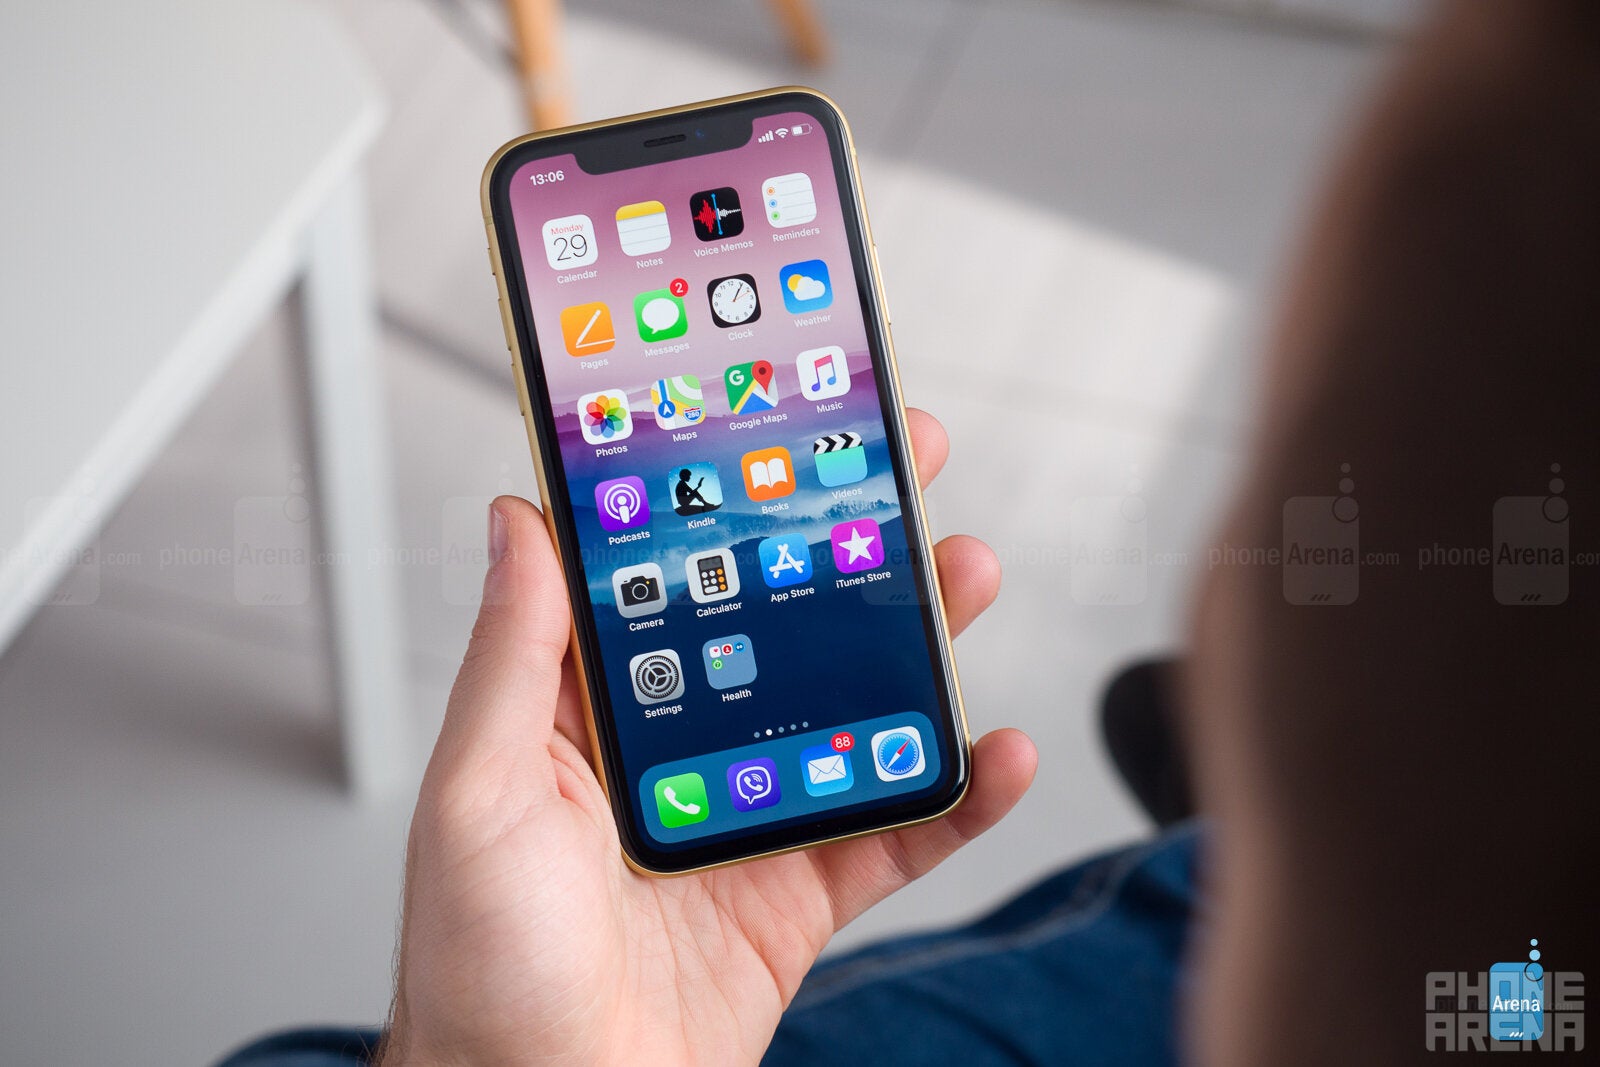 A cheaper iPhone, but an iPhone - Why would a Galaxy S10 Lite exist? What would its price be?